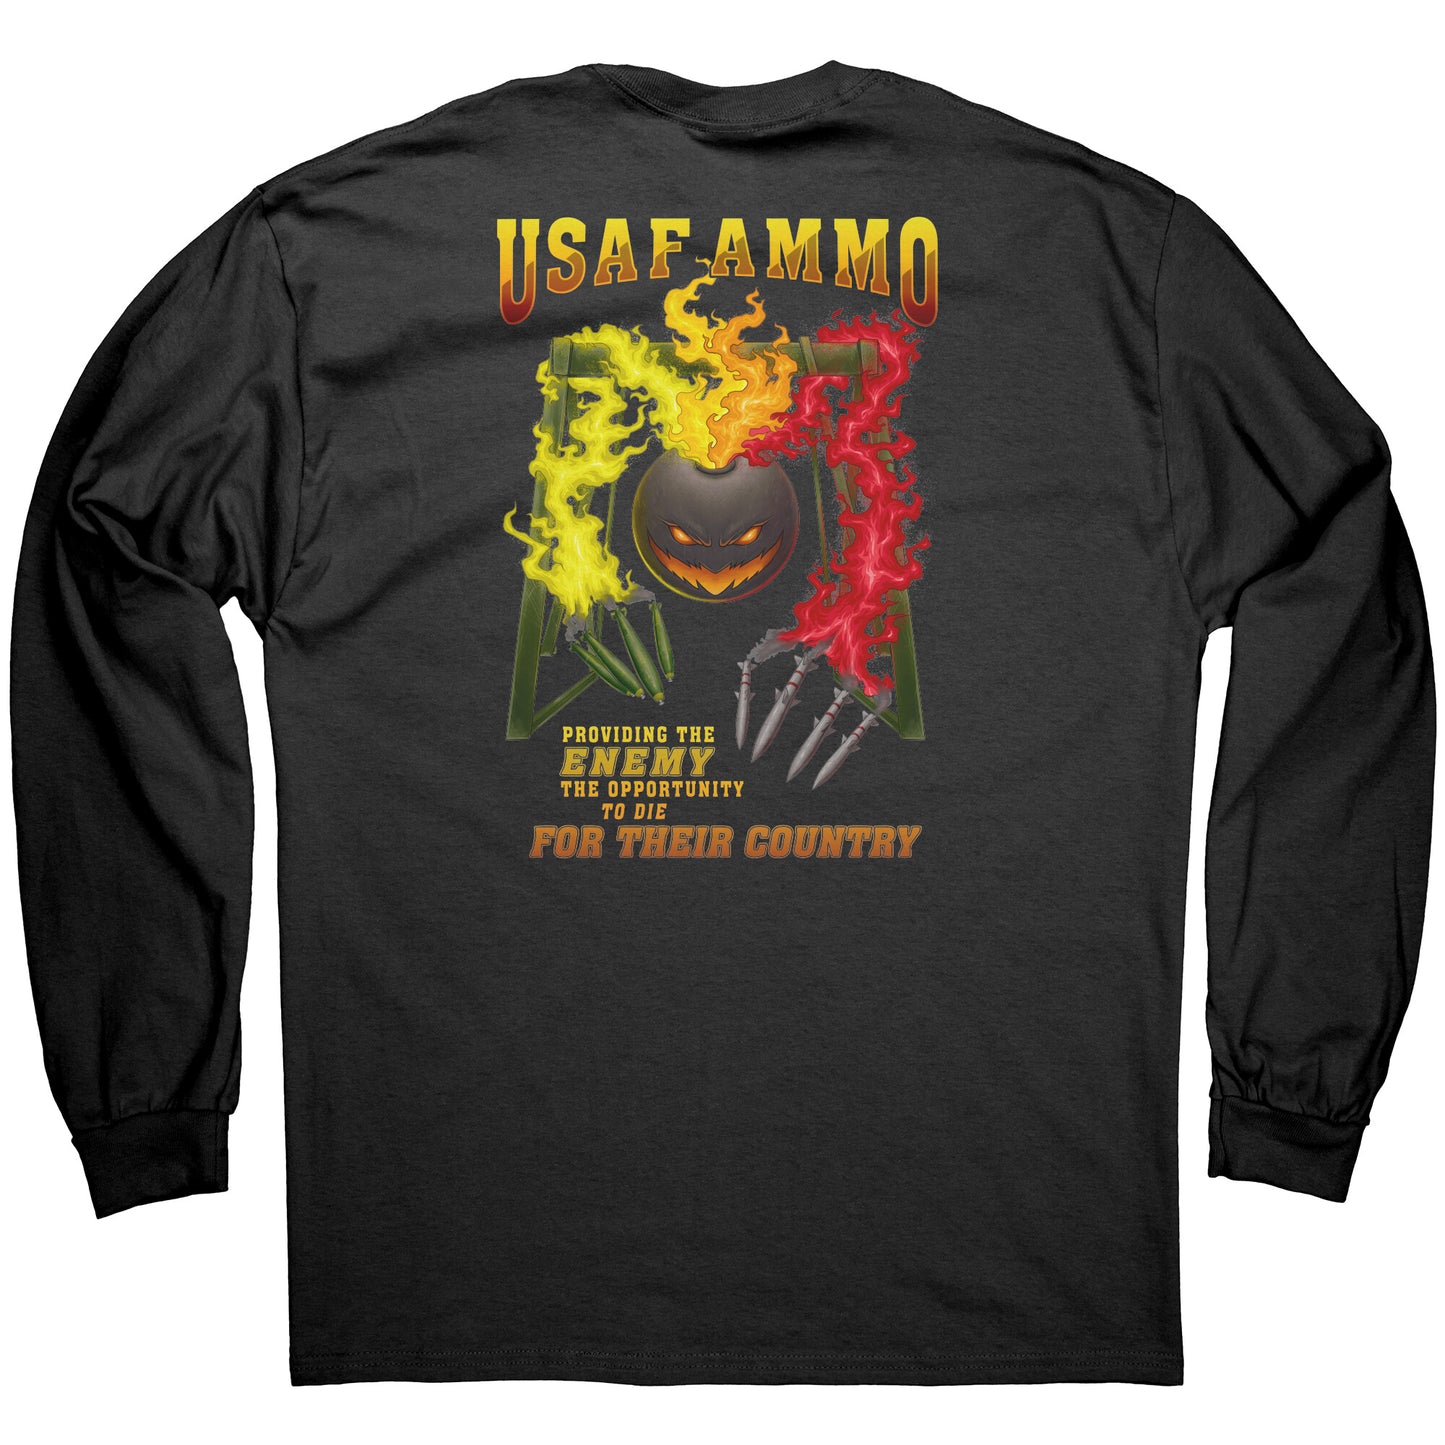 Flaming Pisspot With Arms Gantry Missile and Bomb fingers USAF AMMO IYAAYAS Mens Long Sleeve Tee